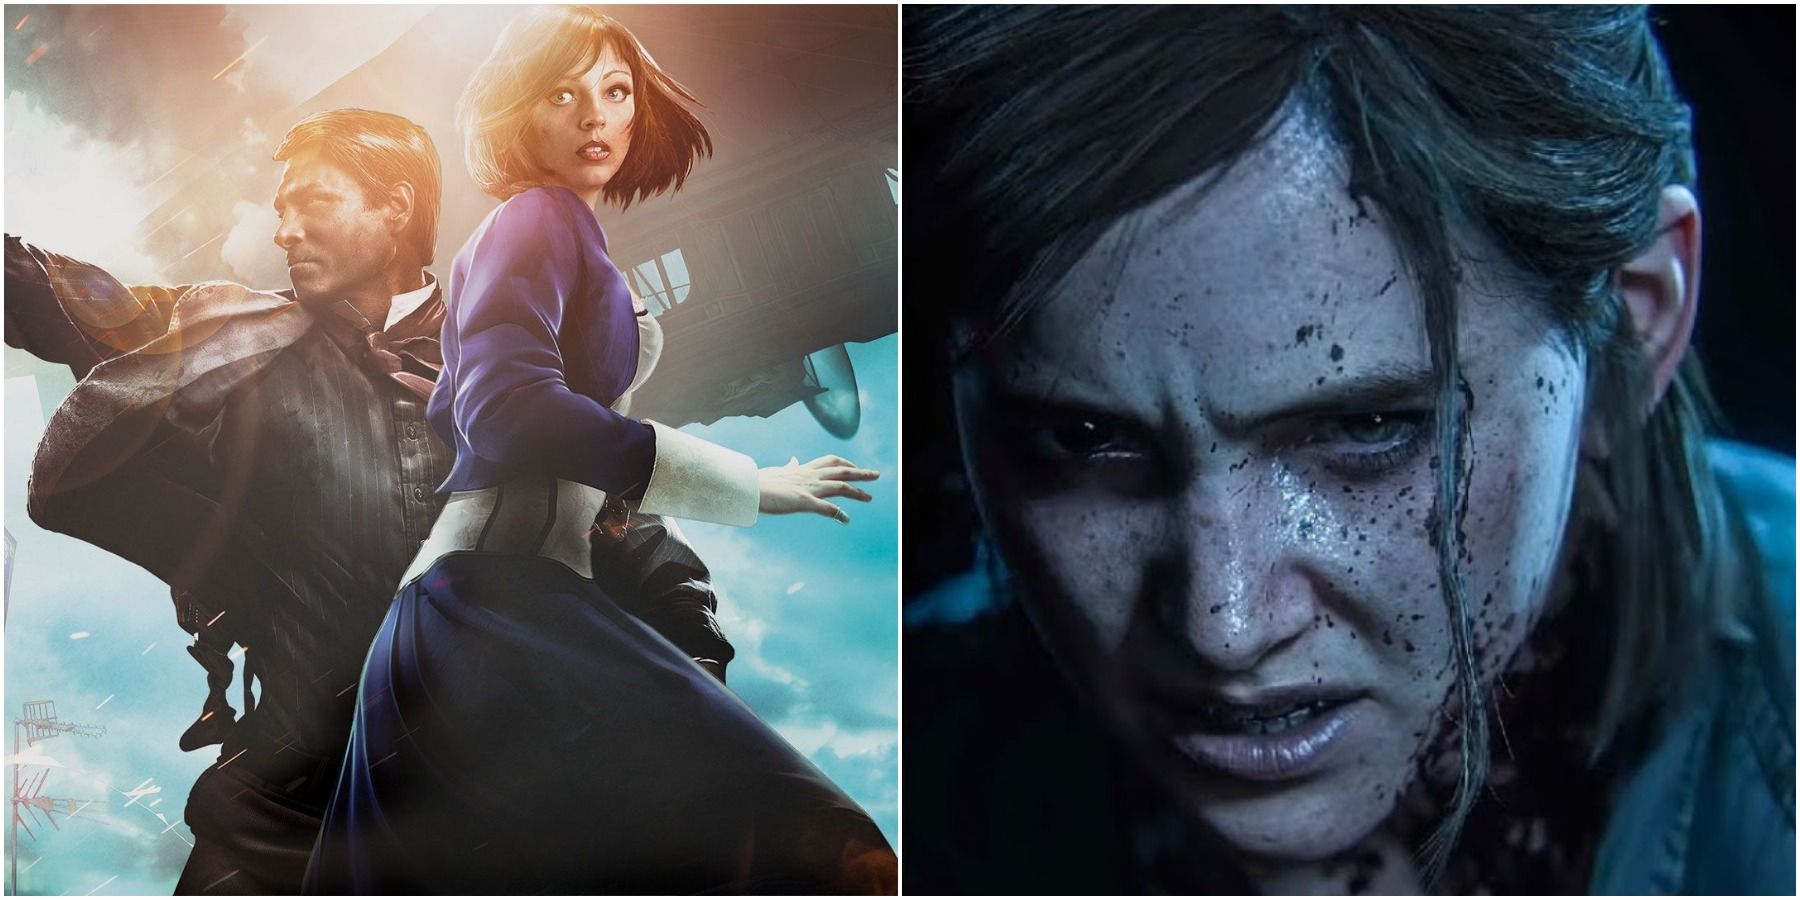 Bioshock Infinite and the Last of Us Part 2